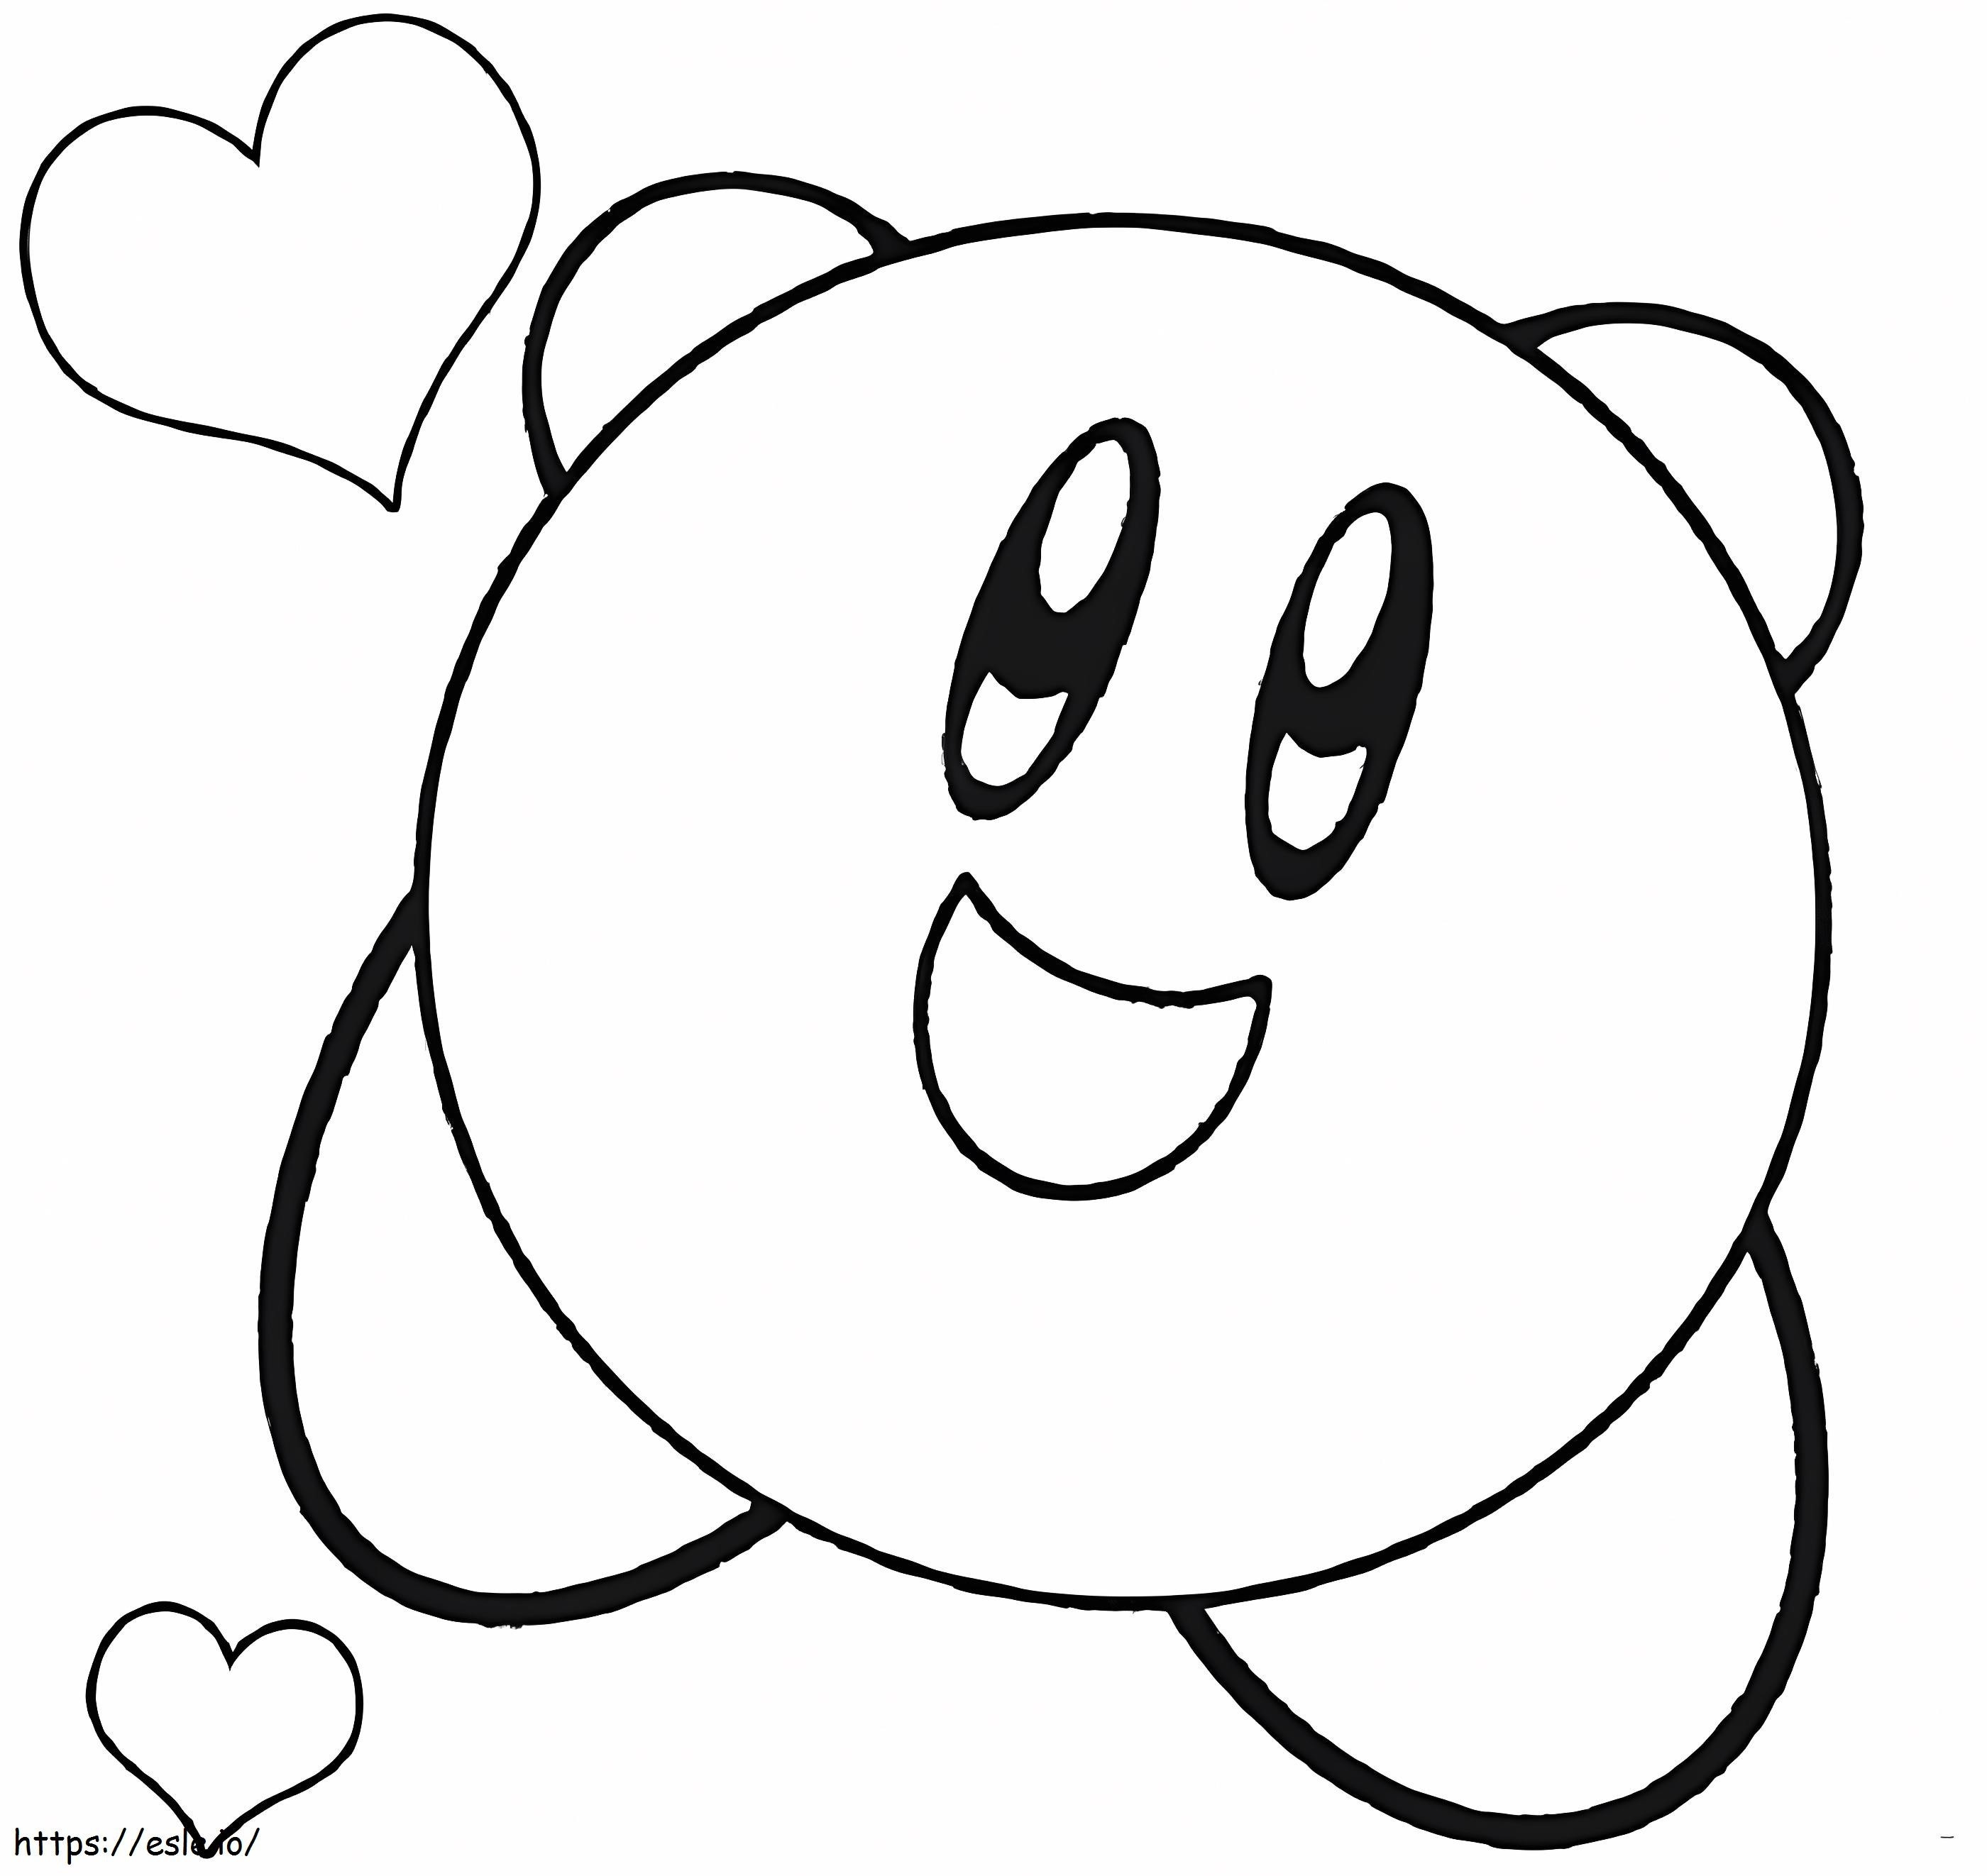 Kirby Smiling coloring page